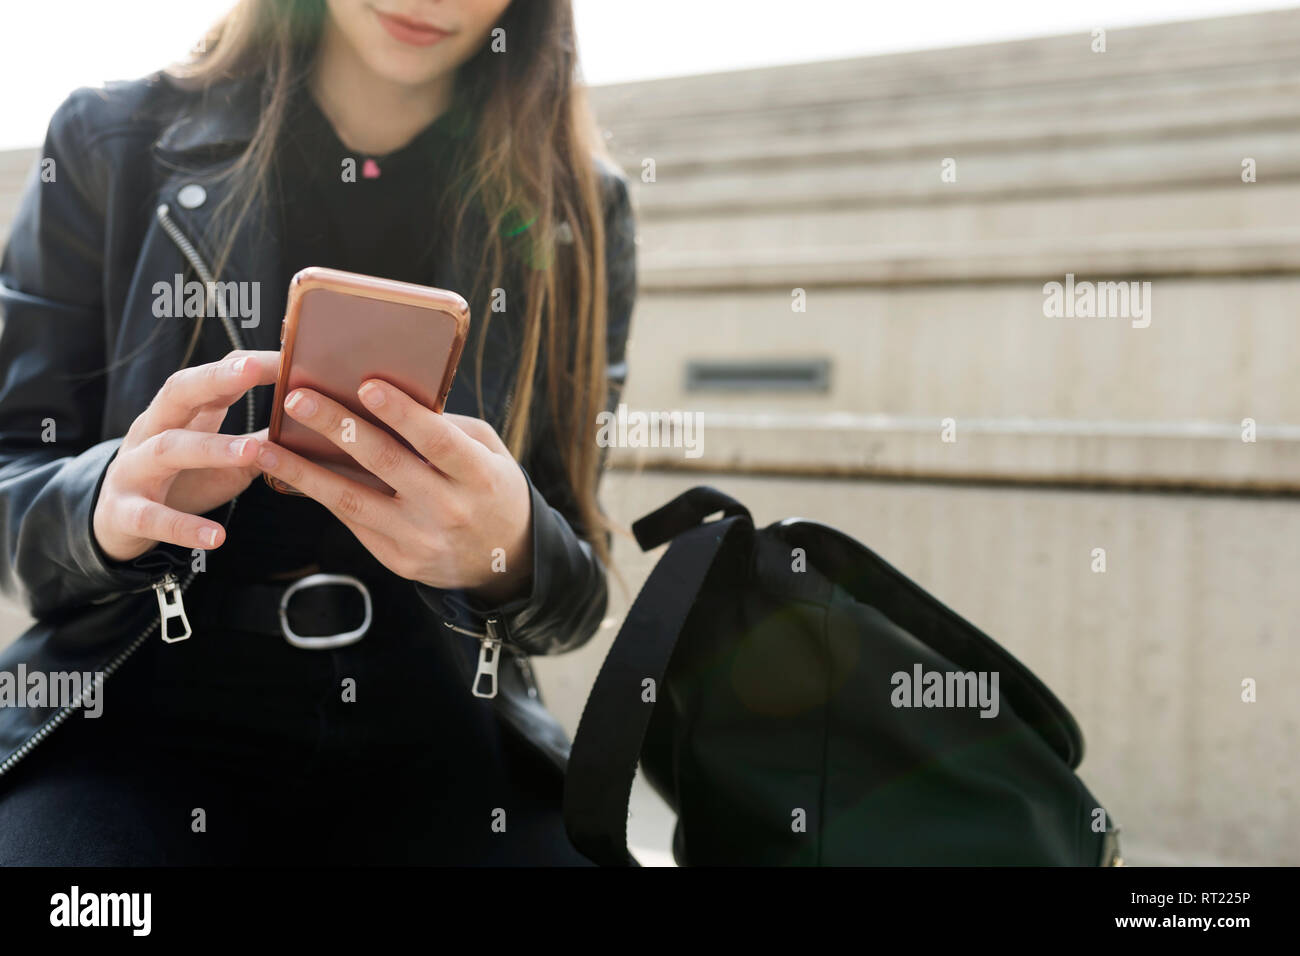 Close-up of young woman sitting on stairs using cell phone Stock Photo